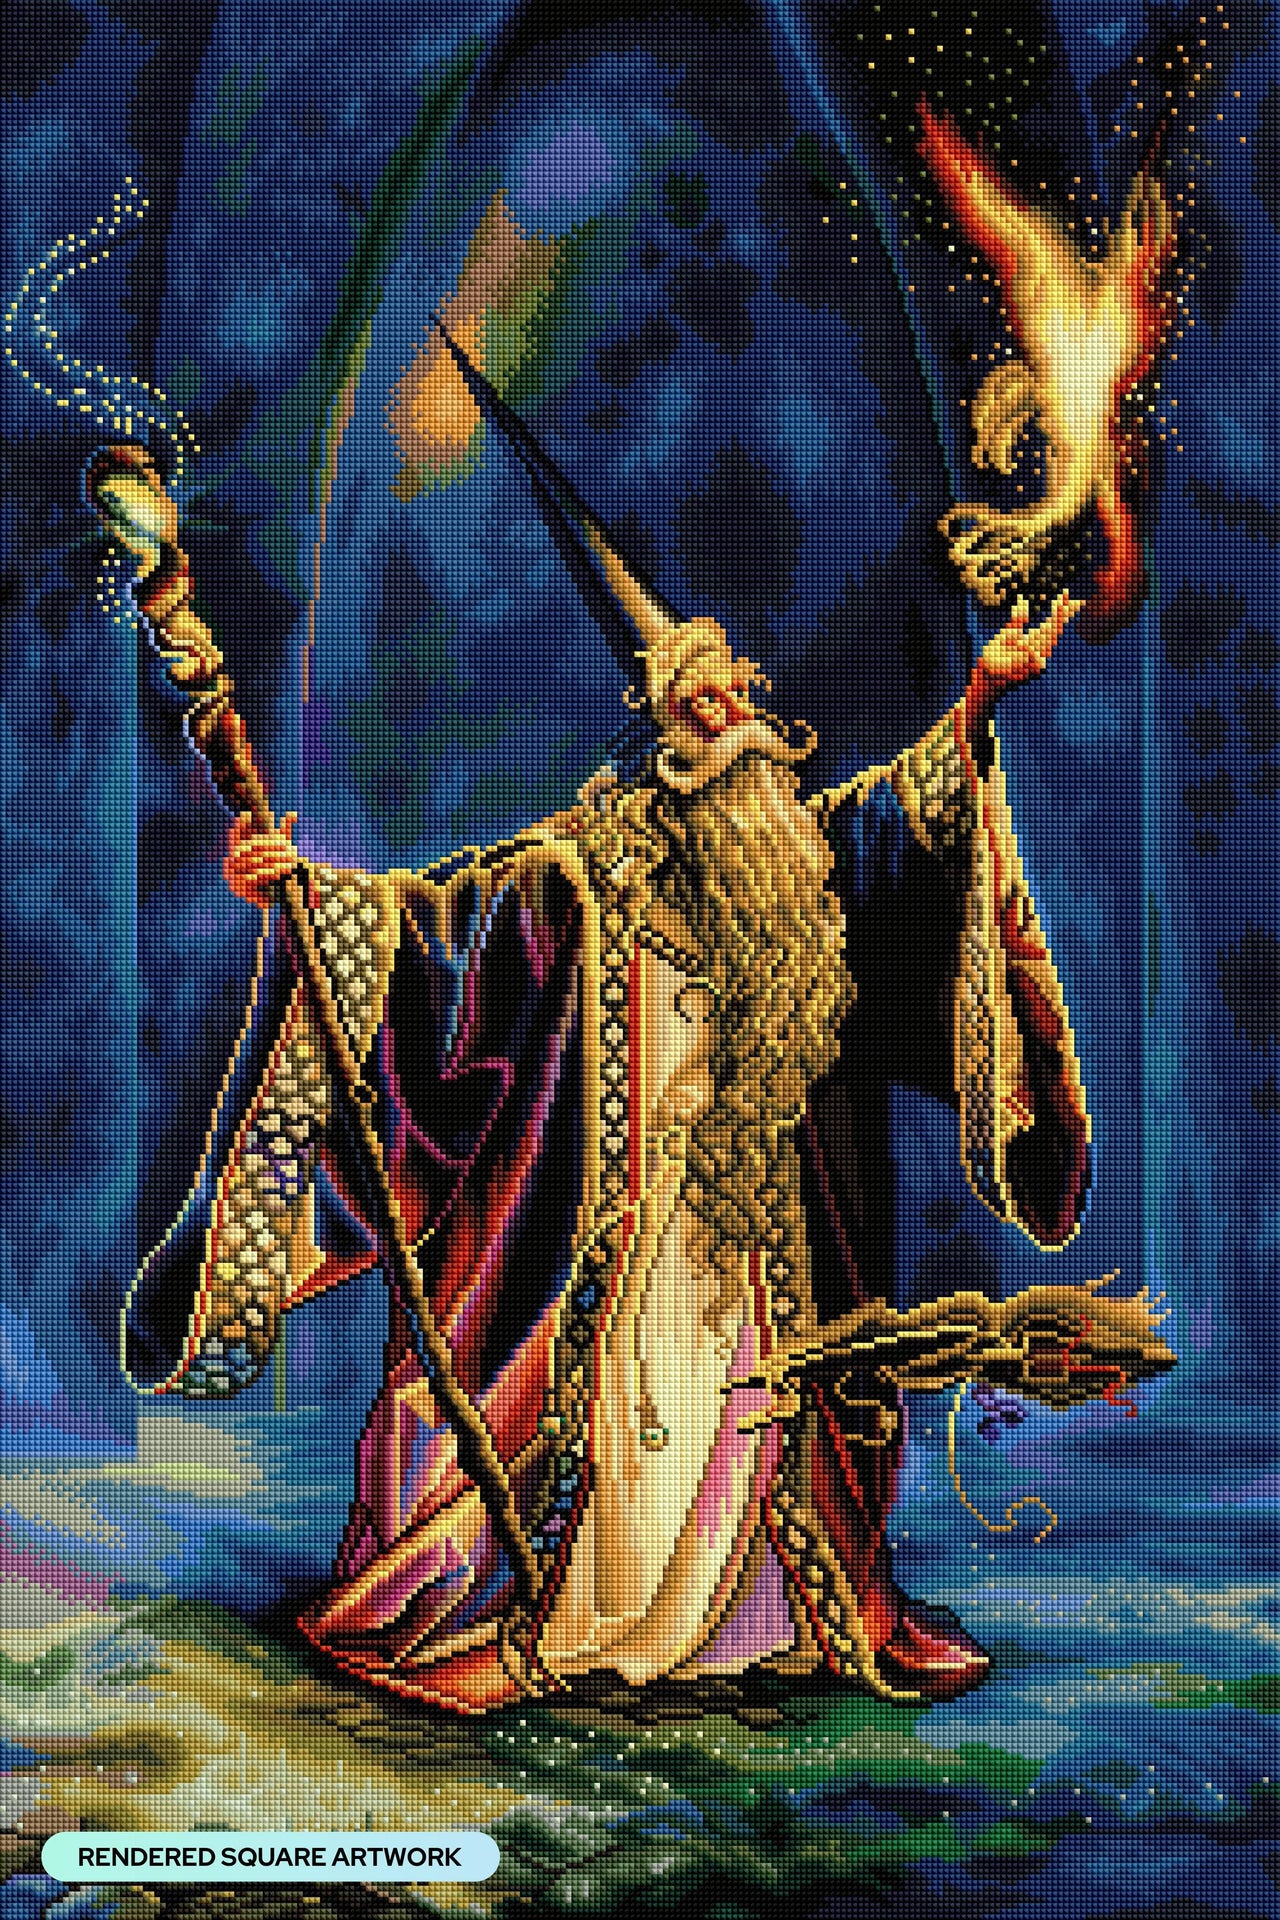 Diamond Painting The Wizard 22" x 33" (55.8cm x 83.7cm) / Square with 54 Colors including 2 ABs and 2 Fairy Dust Diamonds / 75,264